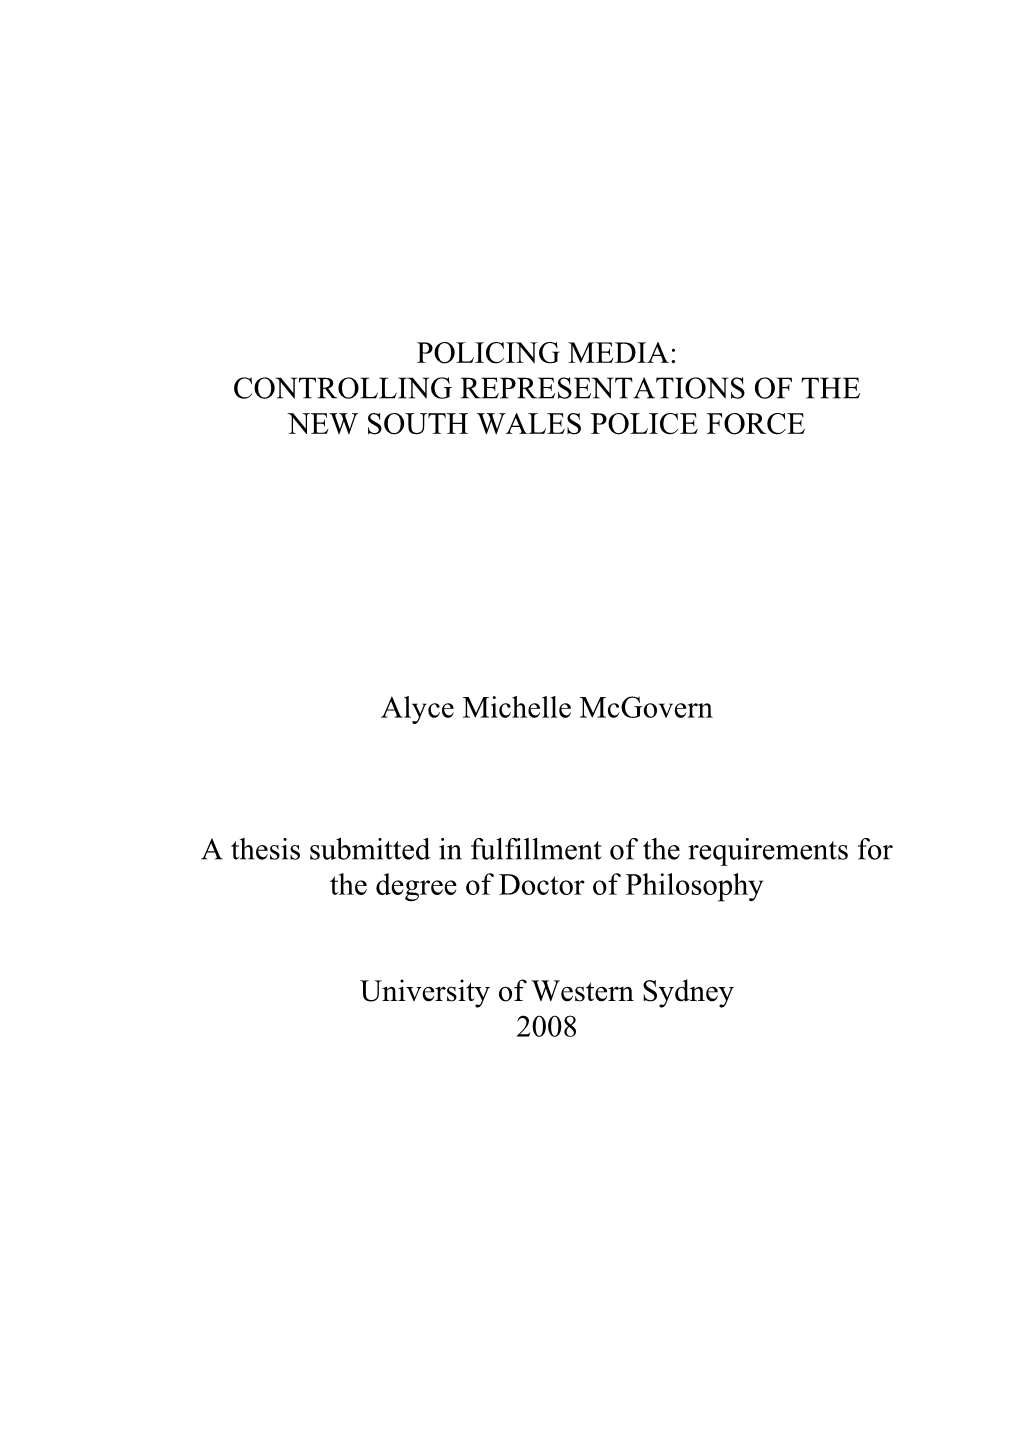 Policing Media: Controlling Representations of the New South Wales Police Force